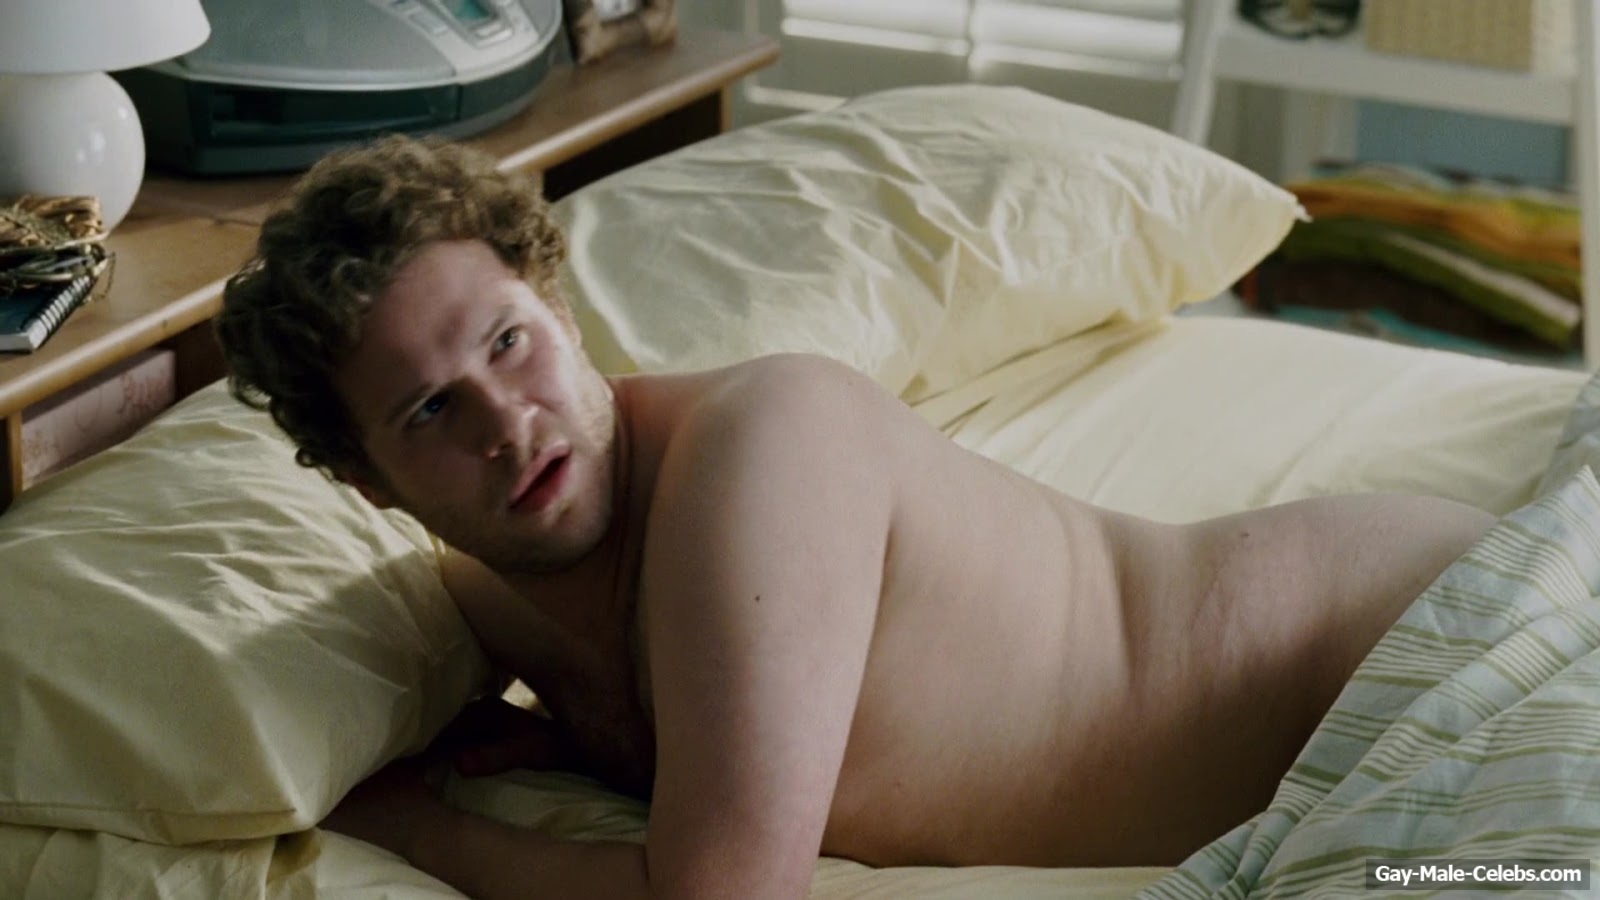 Seth Rogen Nude Ass Moment in Knocked Up